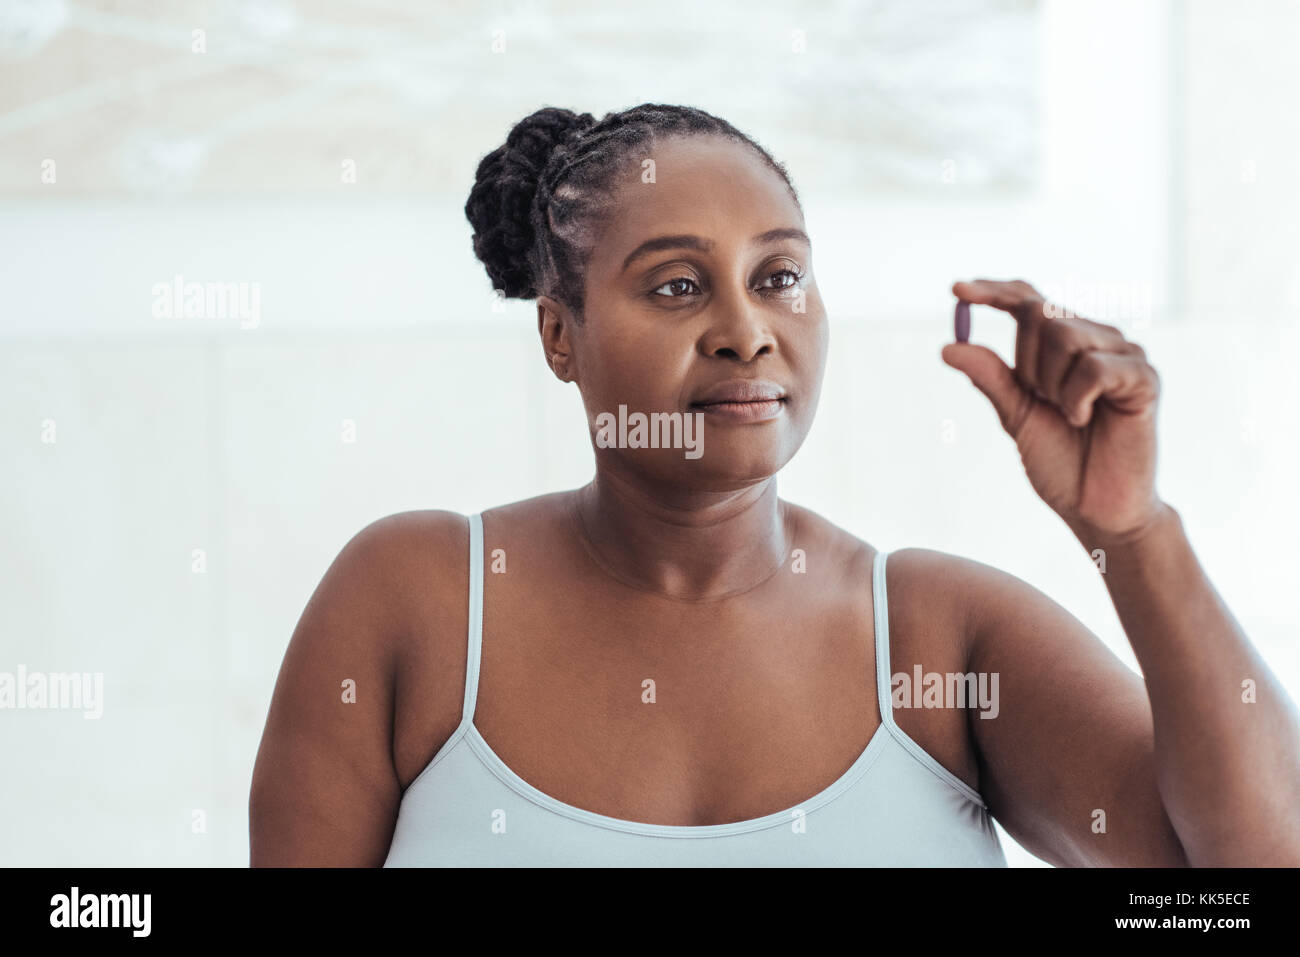 Anxious African woman looking at a pill in her hand Stock Photo